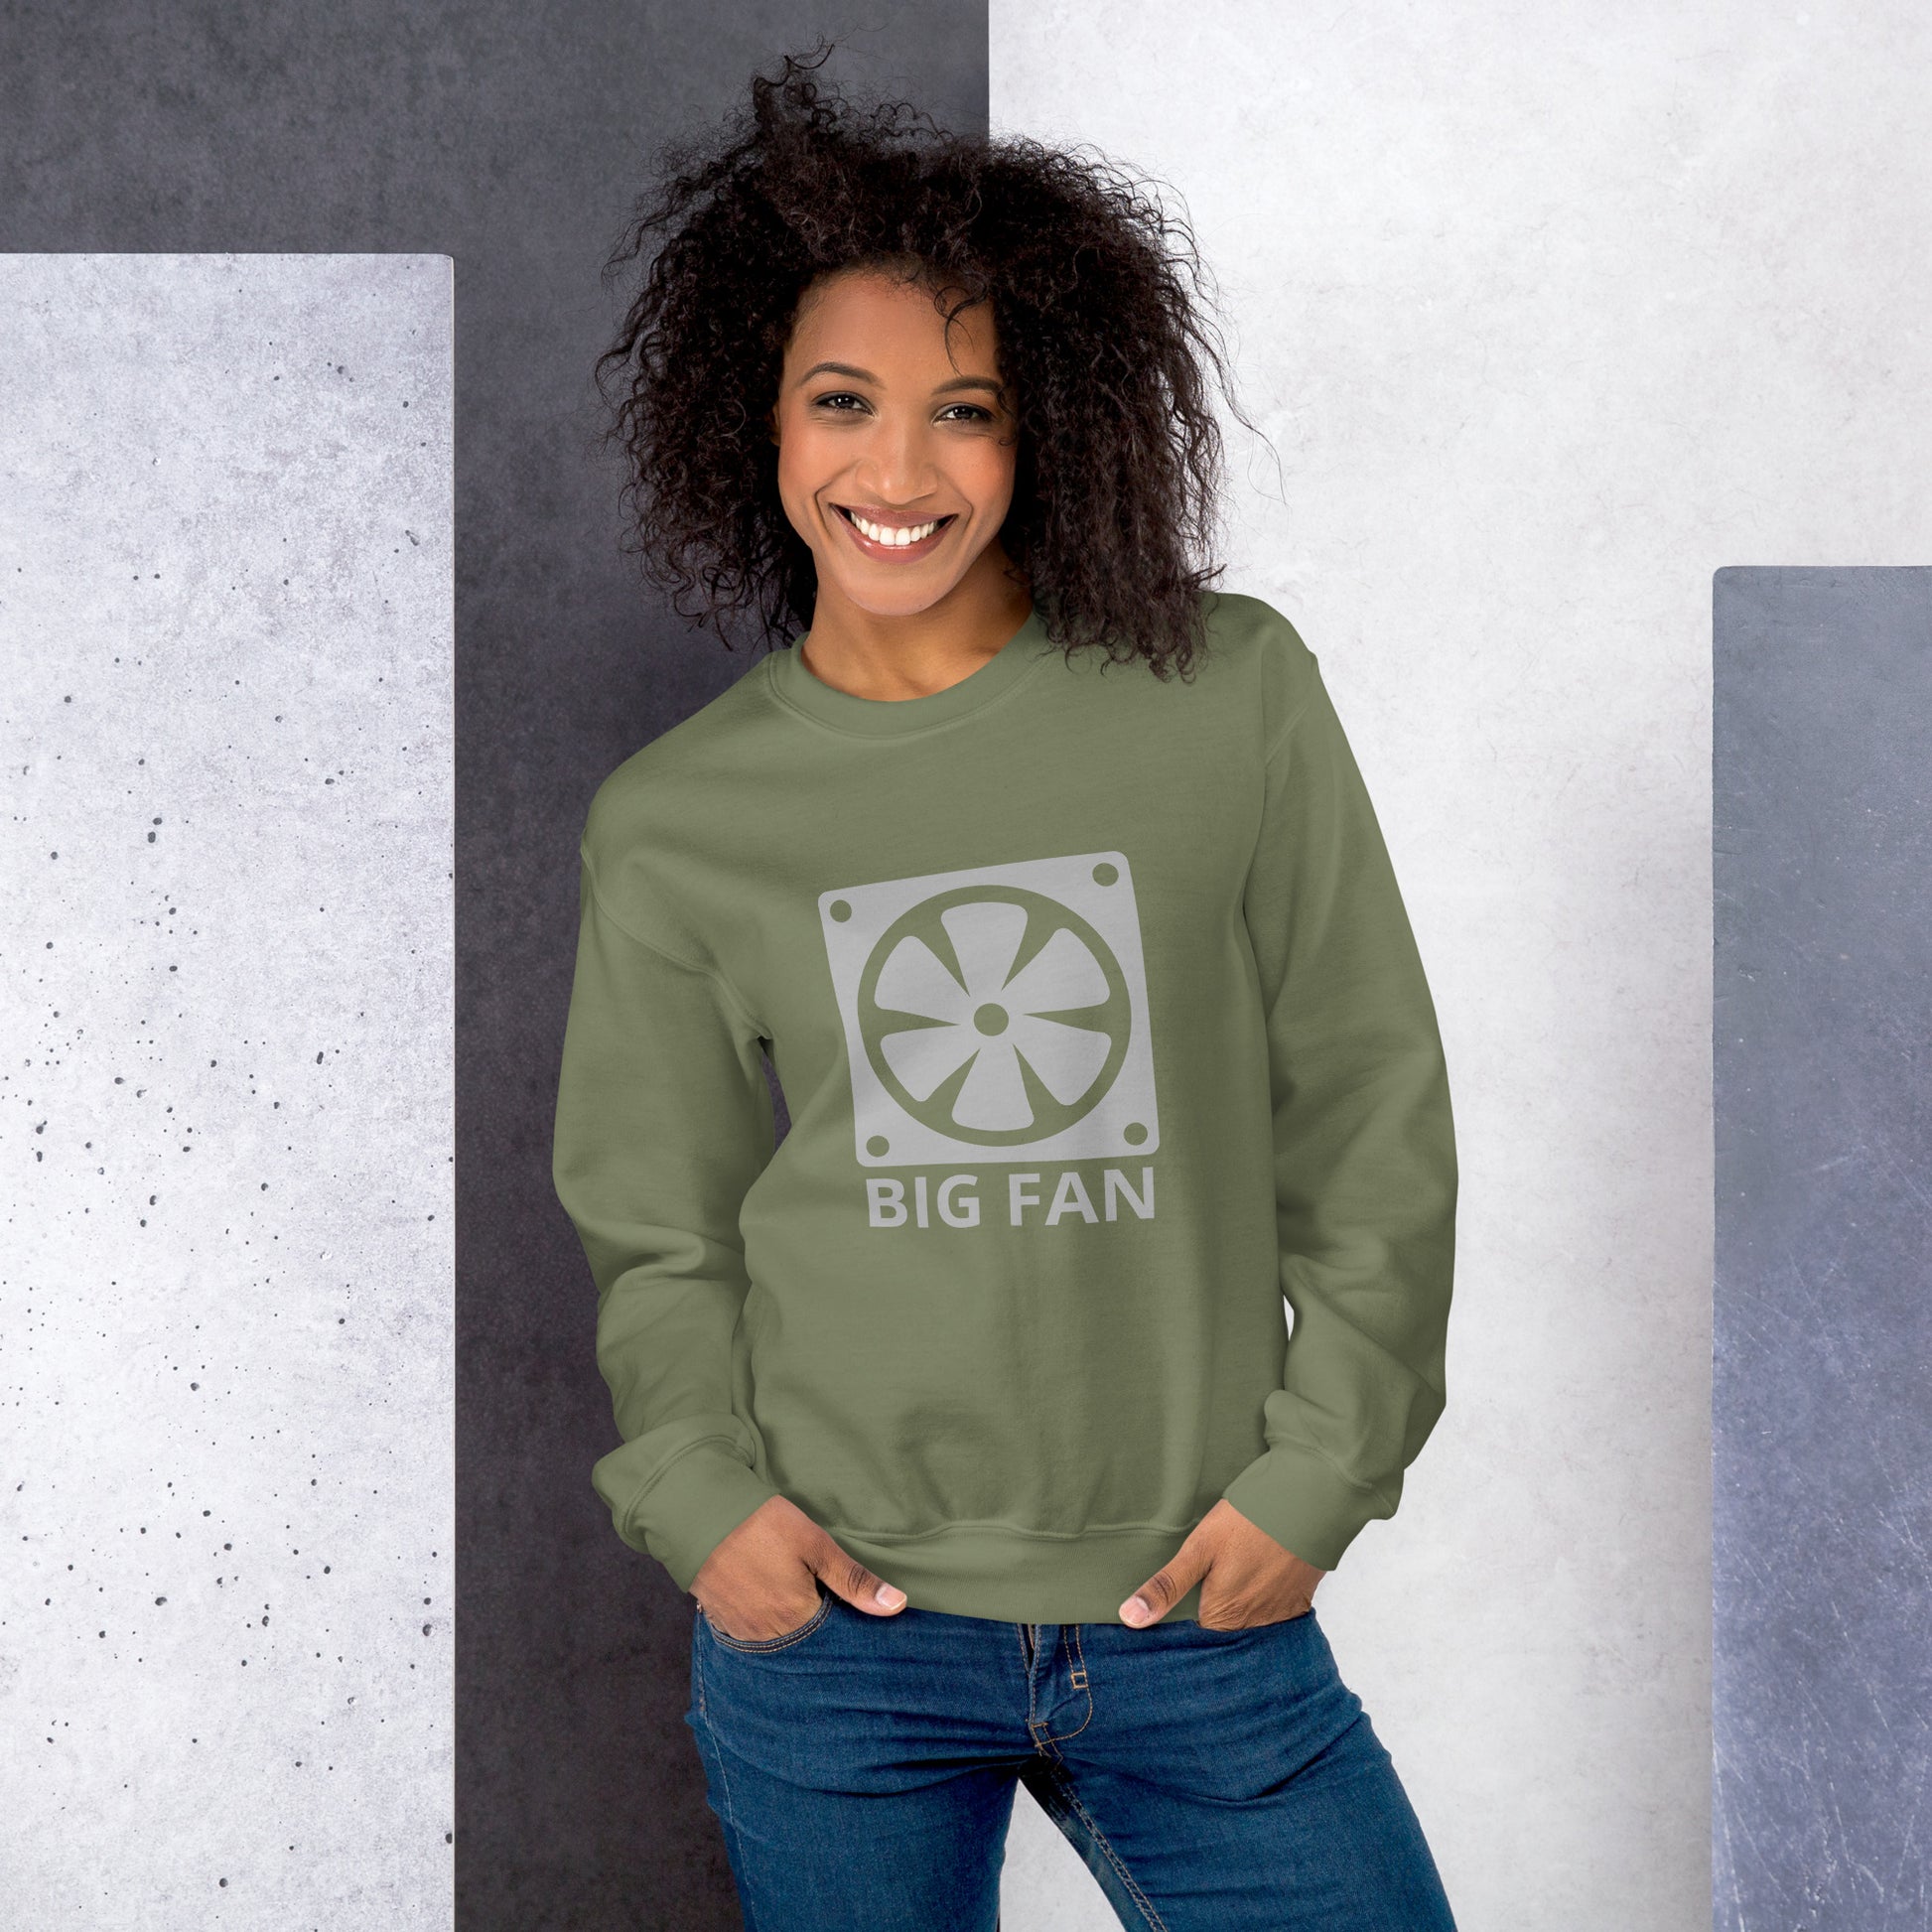 Women with military green sweatshirt with image of a big computer fan and the text "BIG FAN"